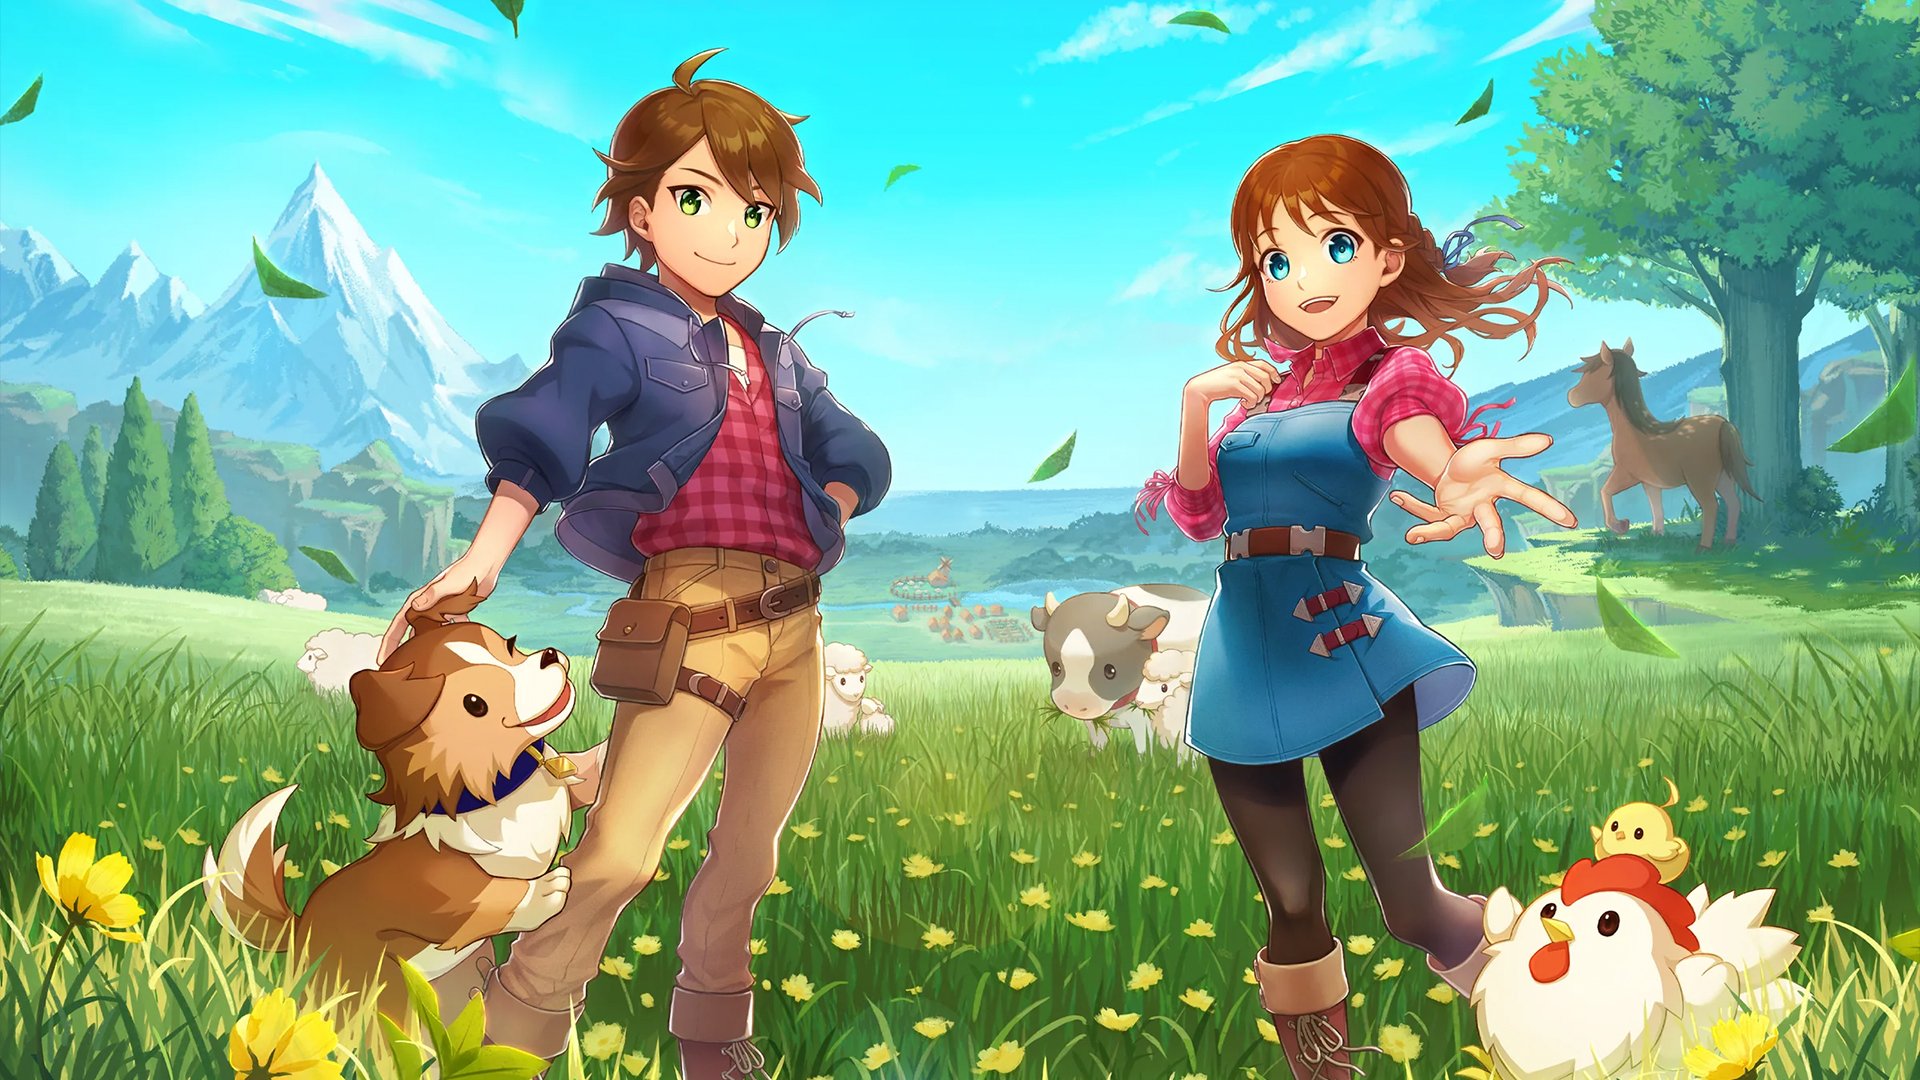 Harvest Moon: The Winds of Anthos Steam Release Delayed to Unknown Date